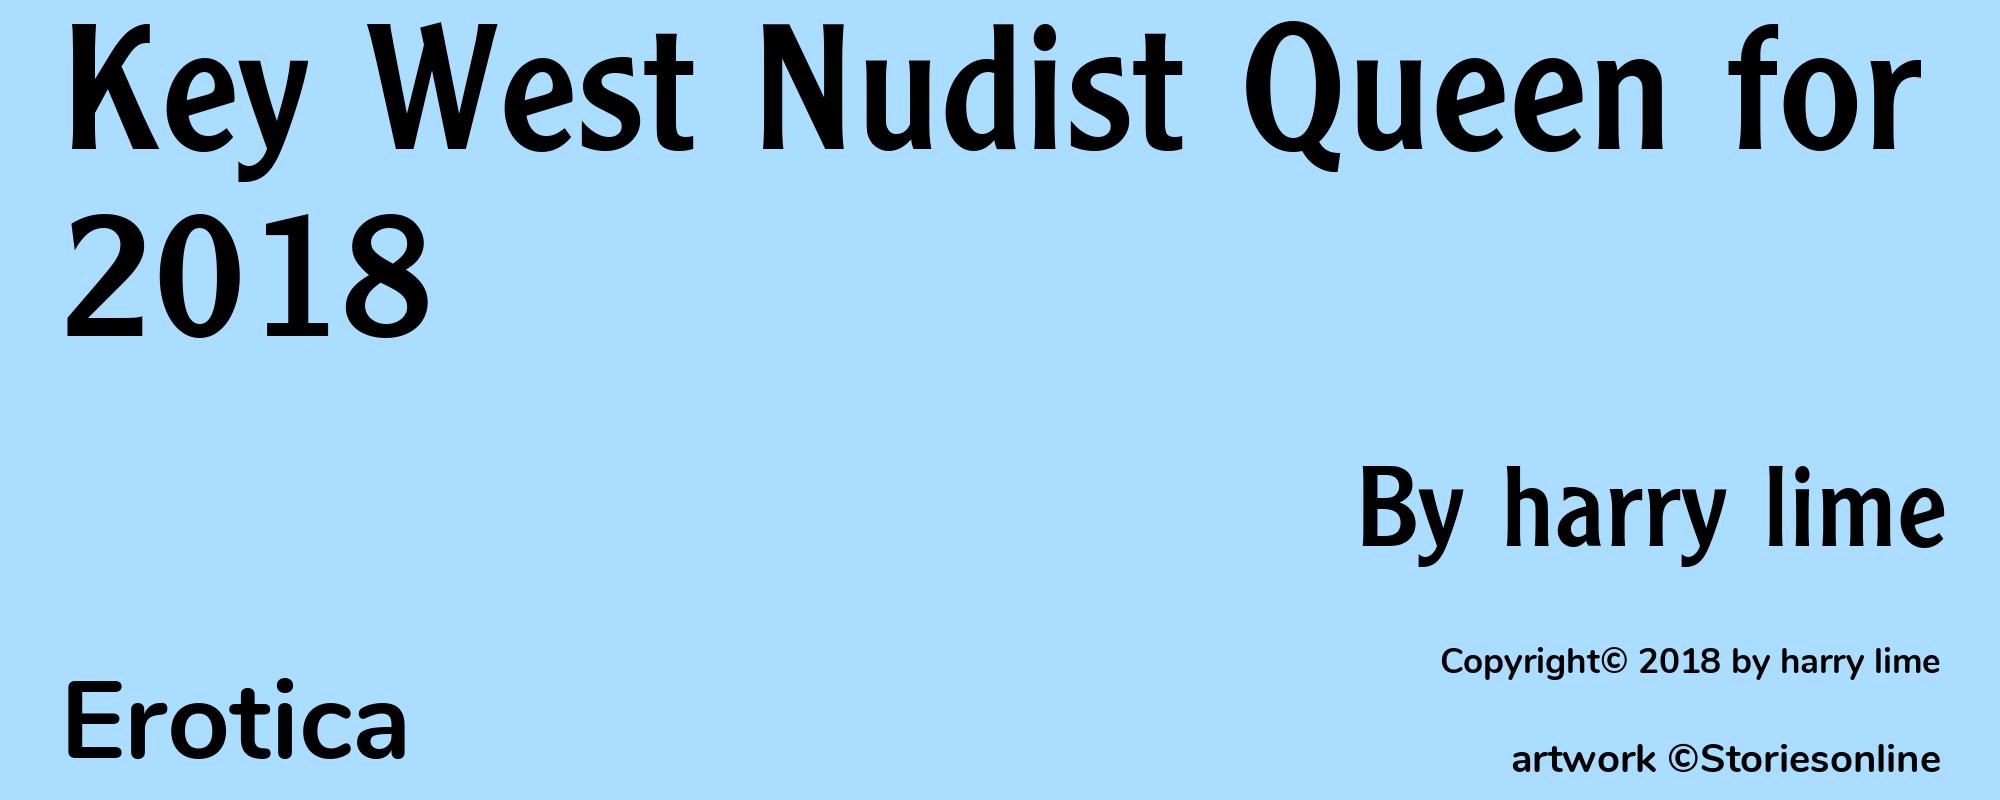 Key West Nudist Queen for 2018 - Cover